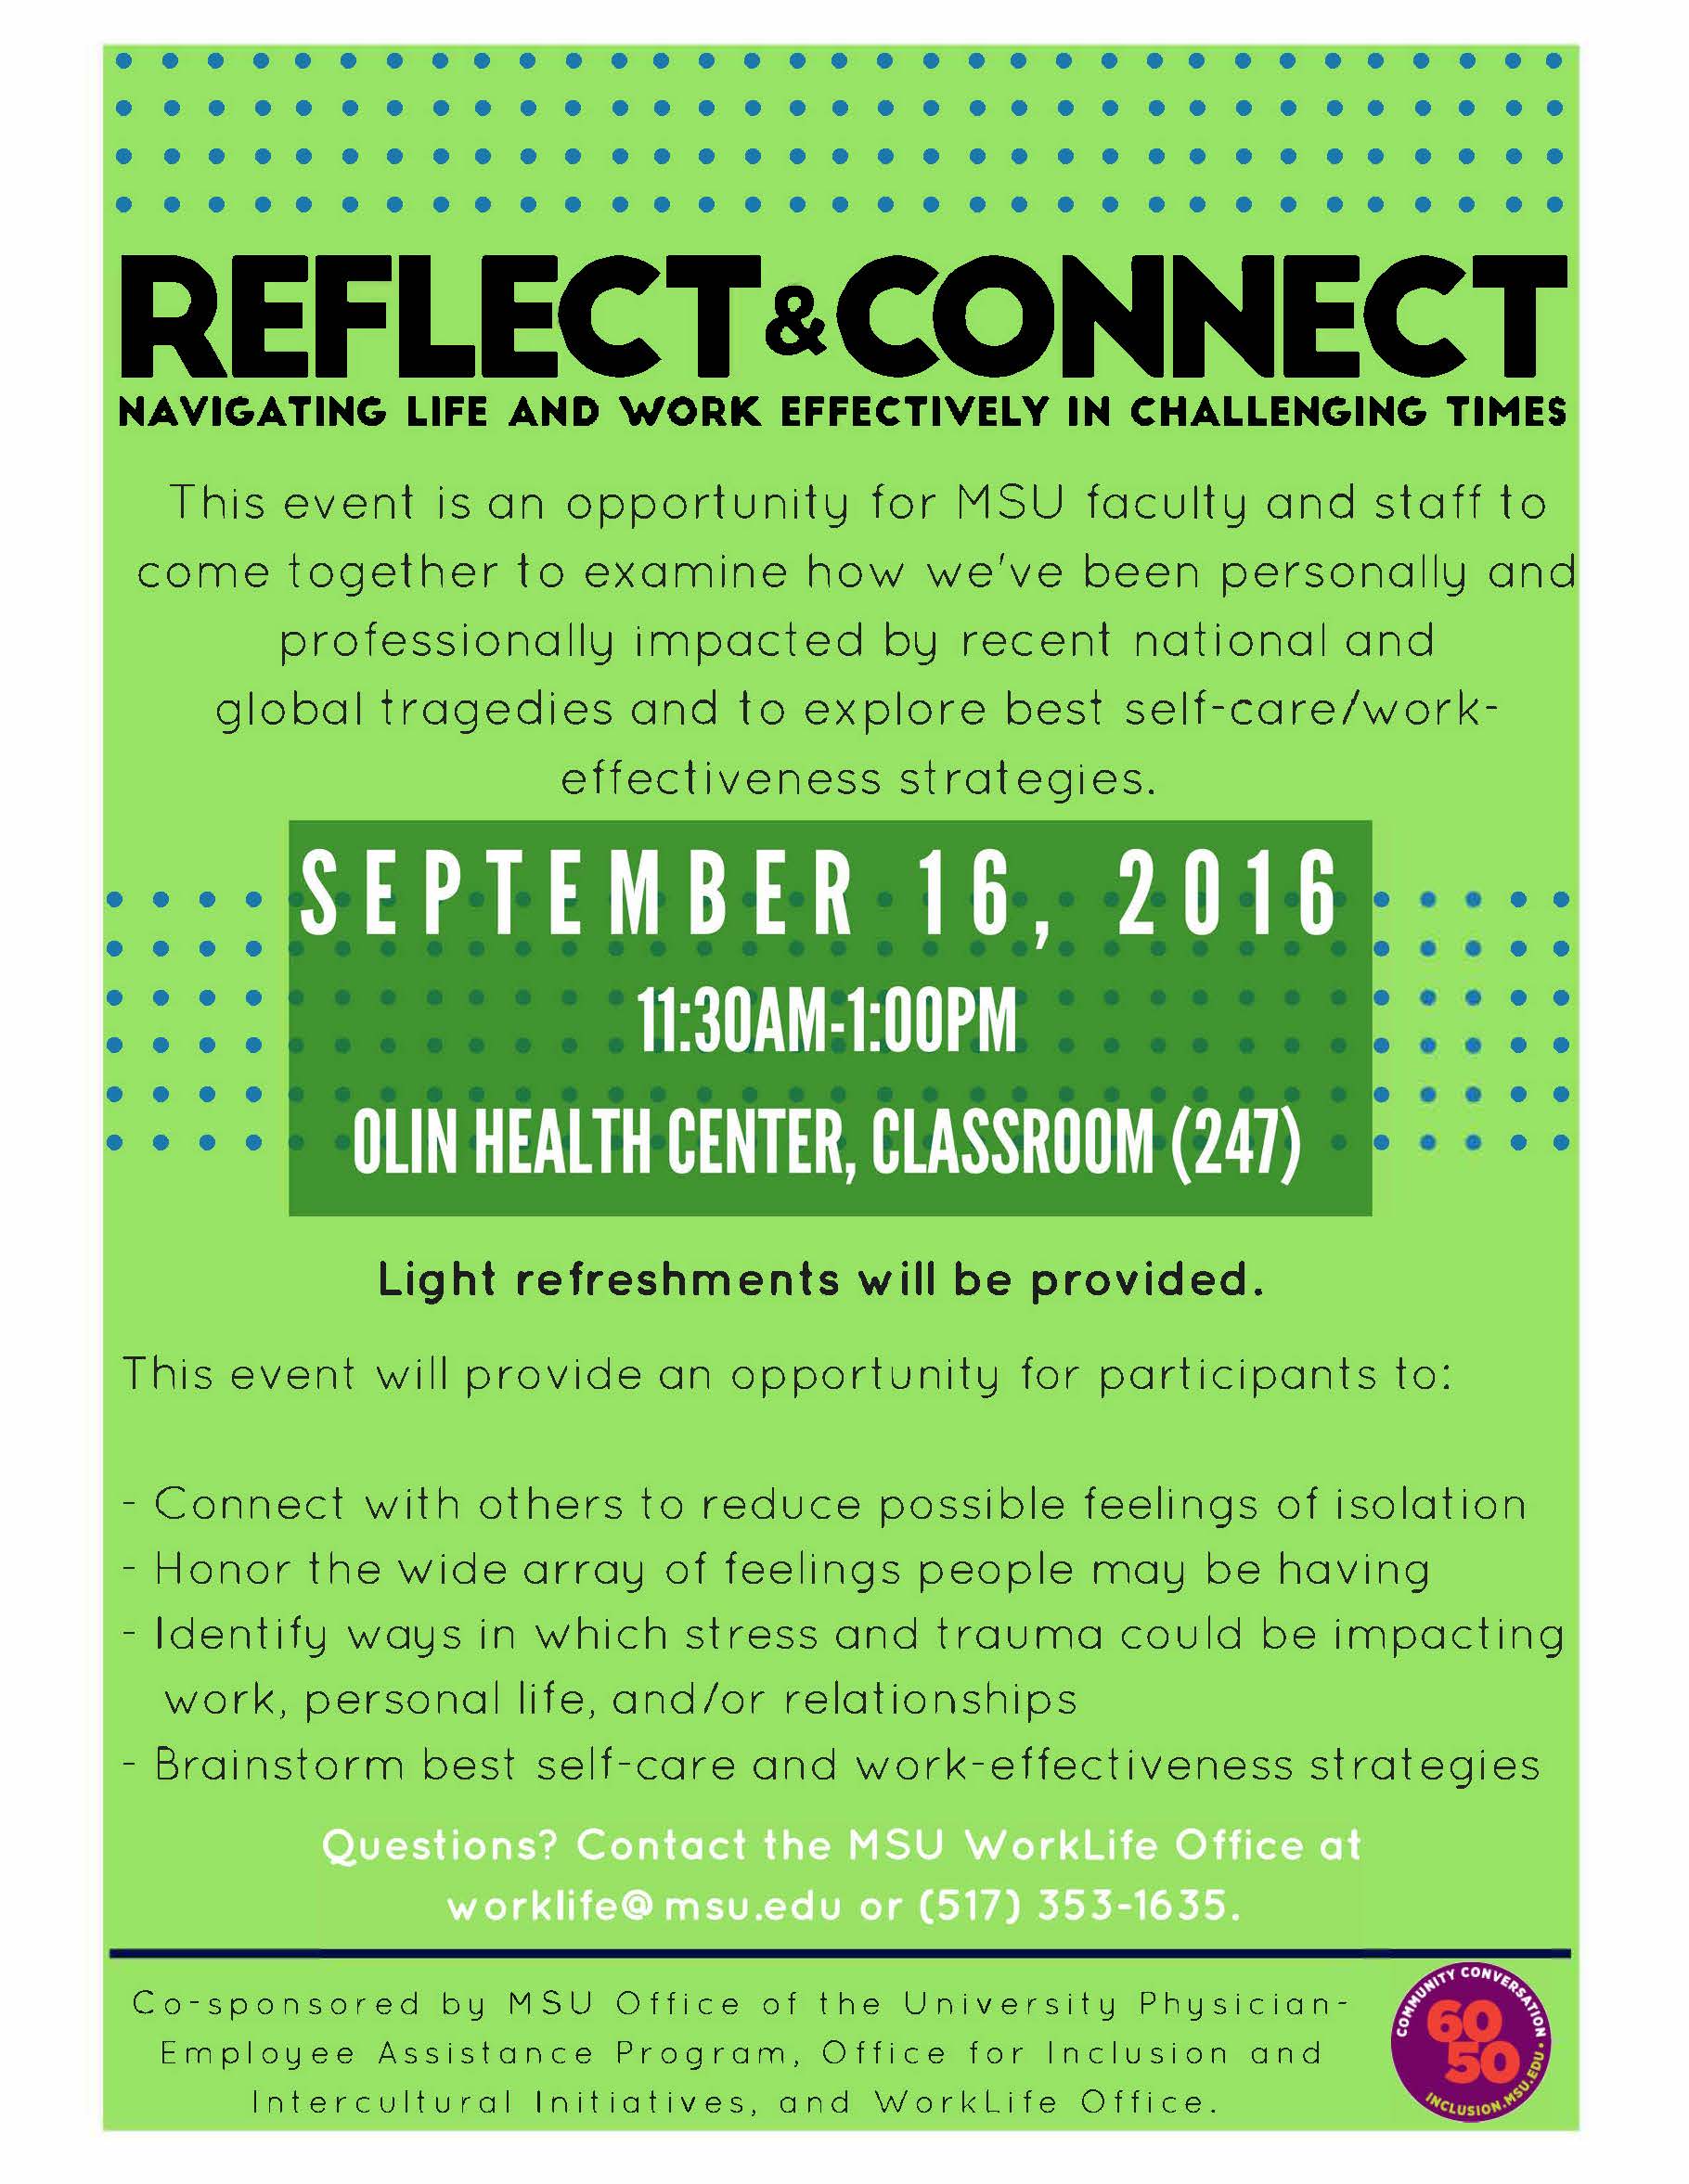 9-16-16-reflect-connect-60-50